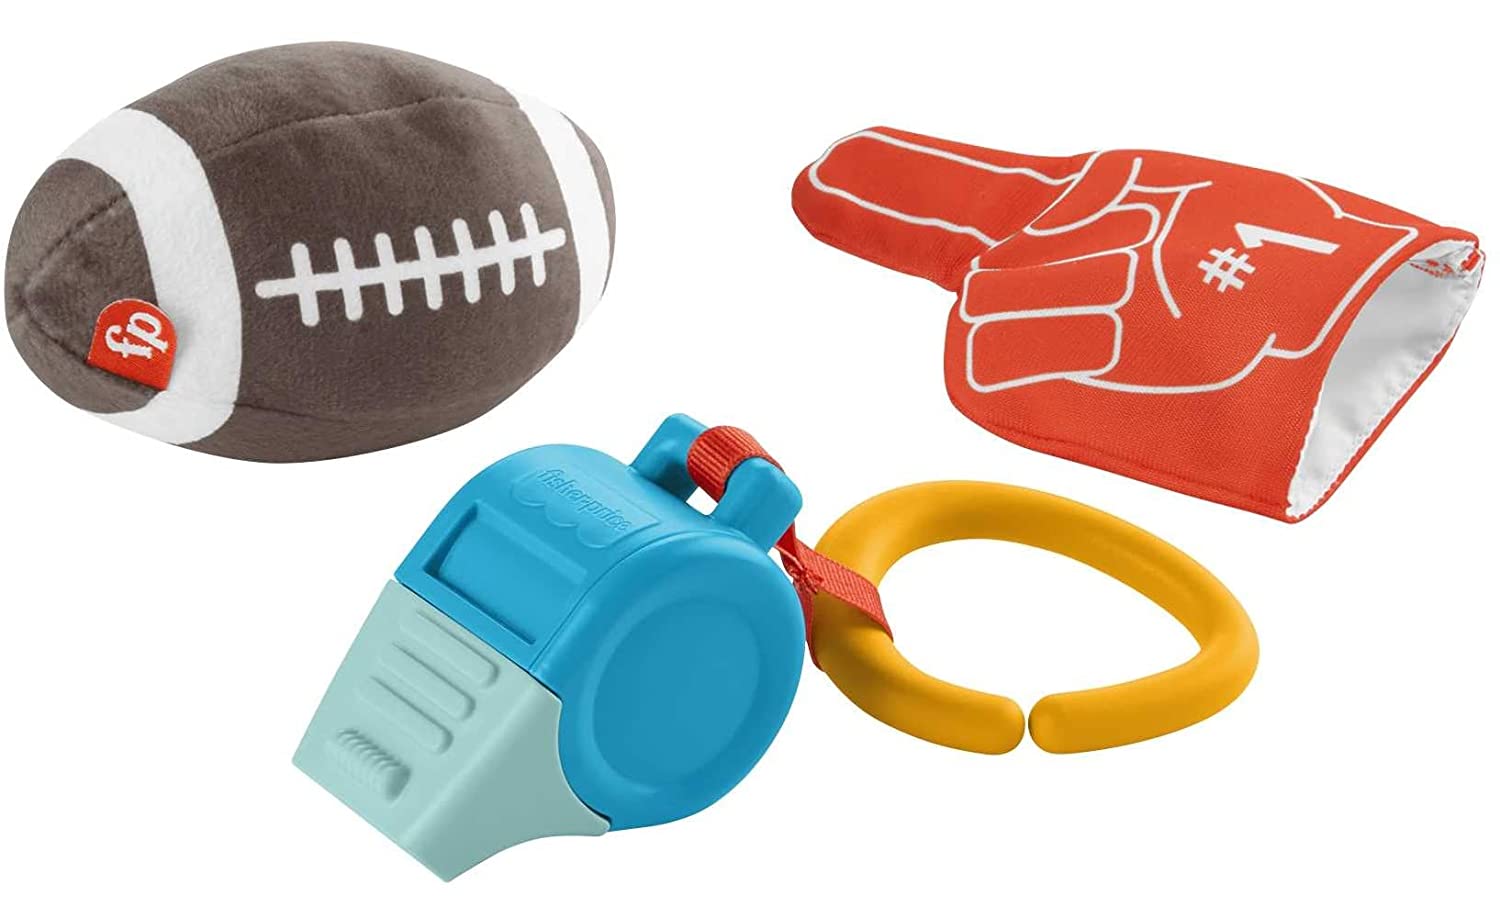 3-Count Fisher-Price Tiny Touchdowns Toy Playset $5.93 + Free Shipping w/ Prime or $25+